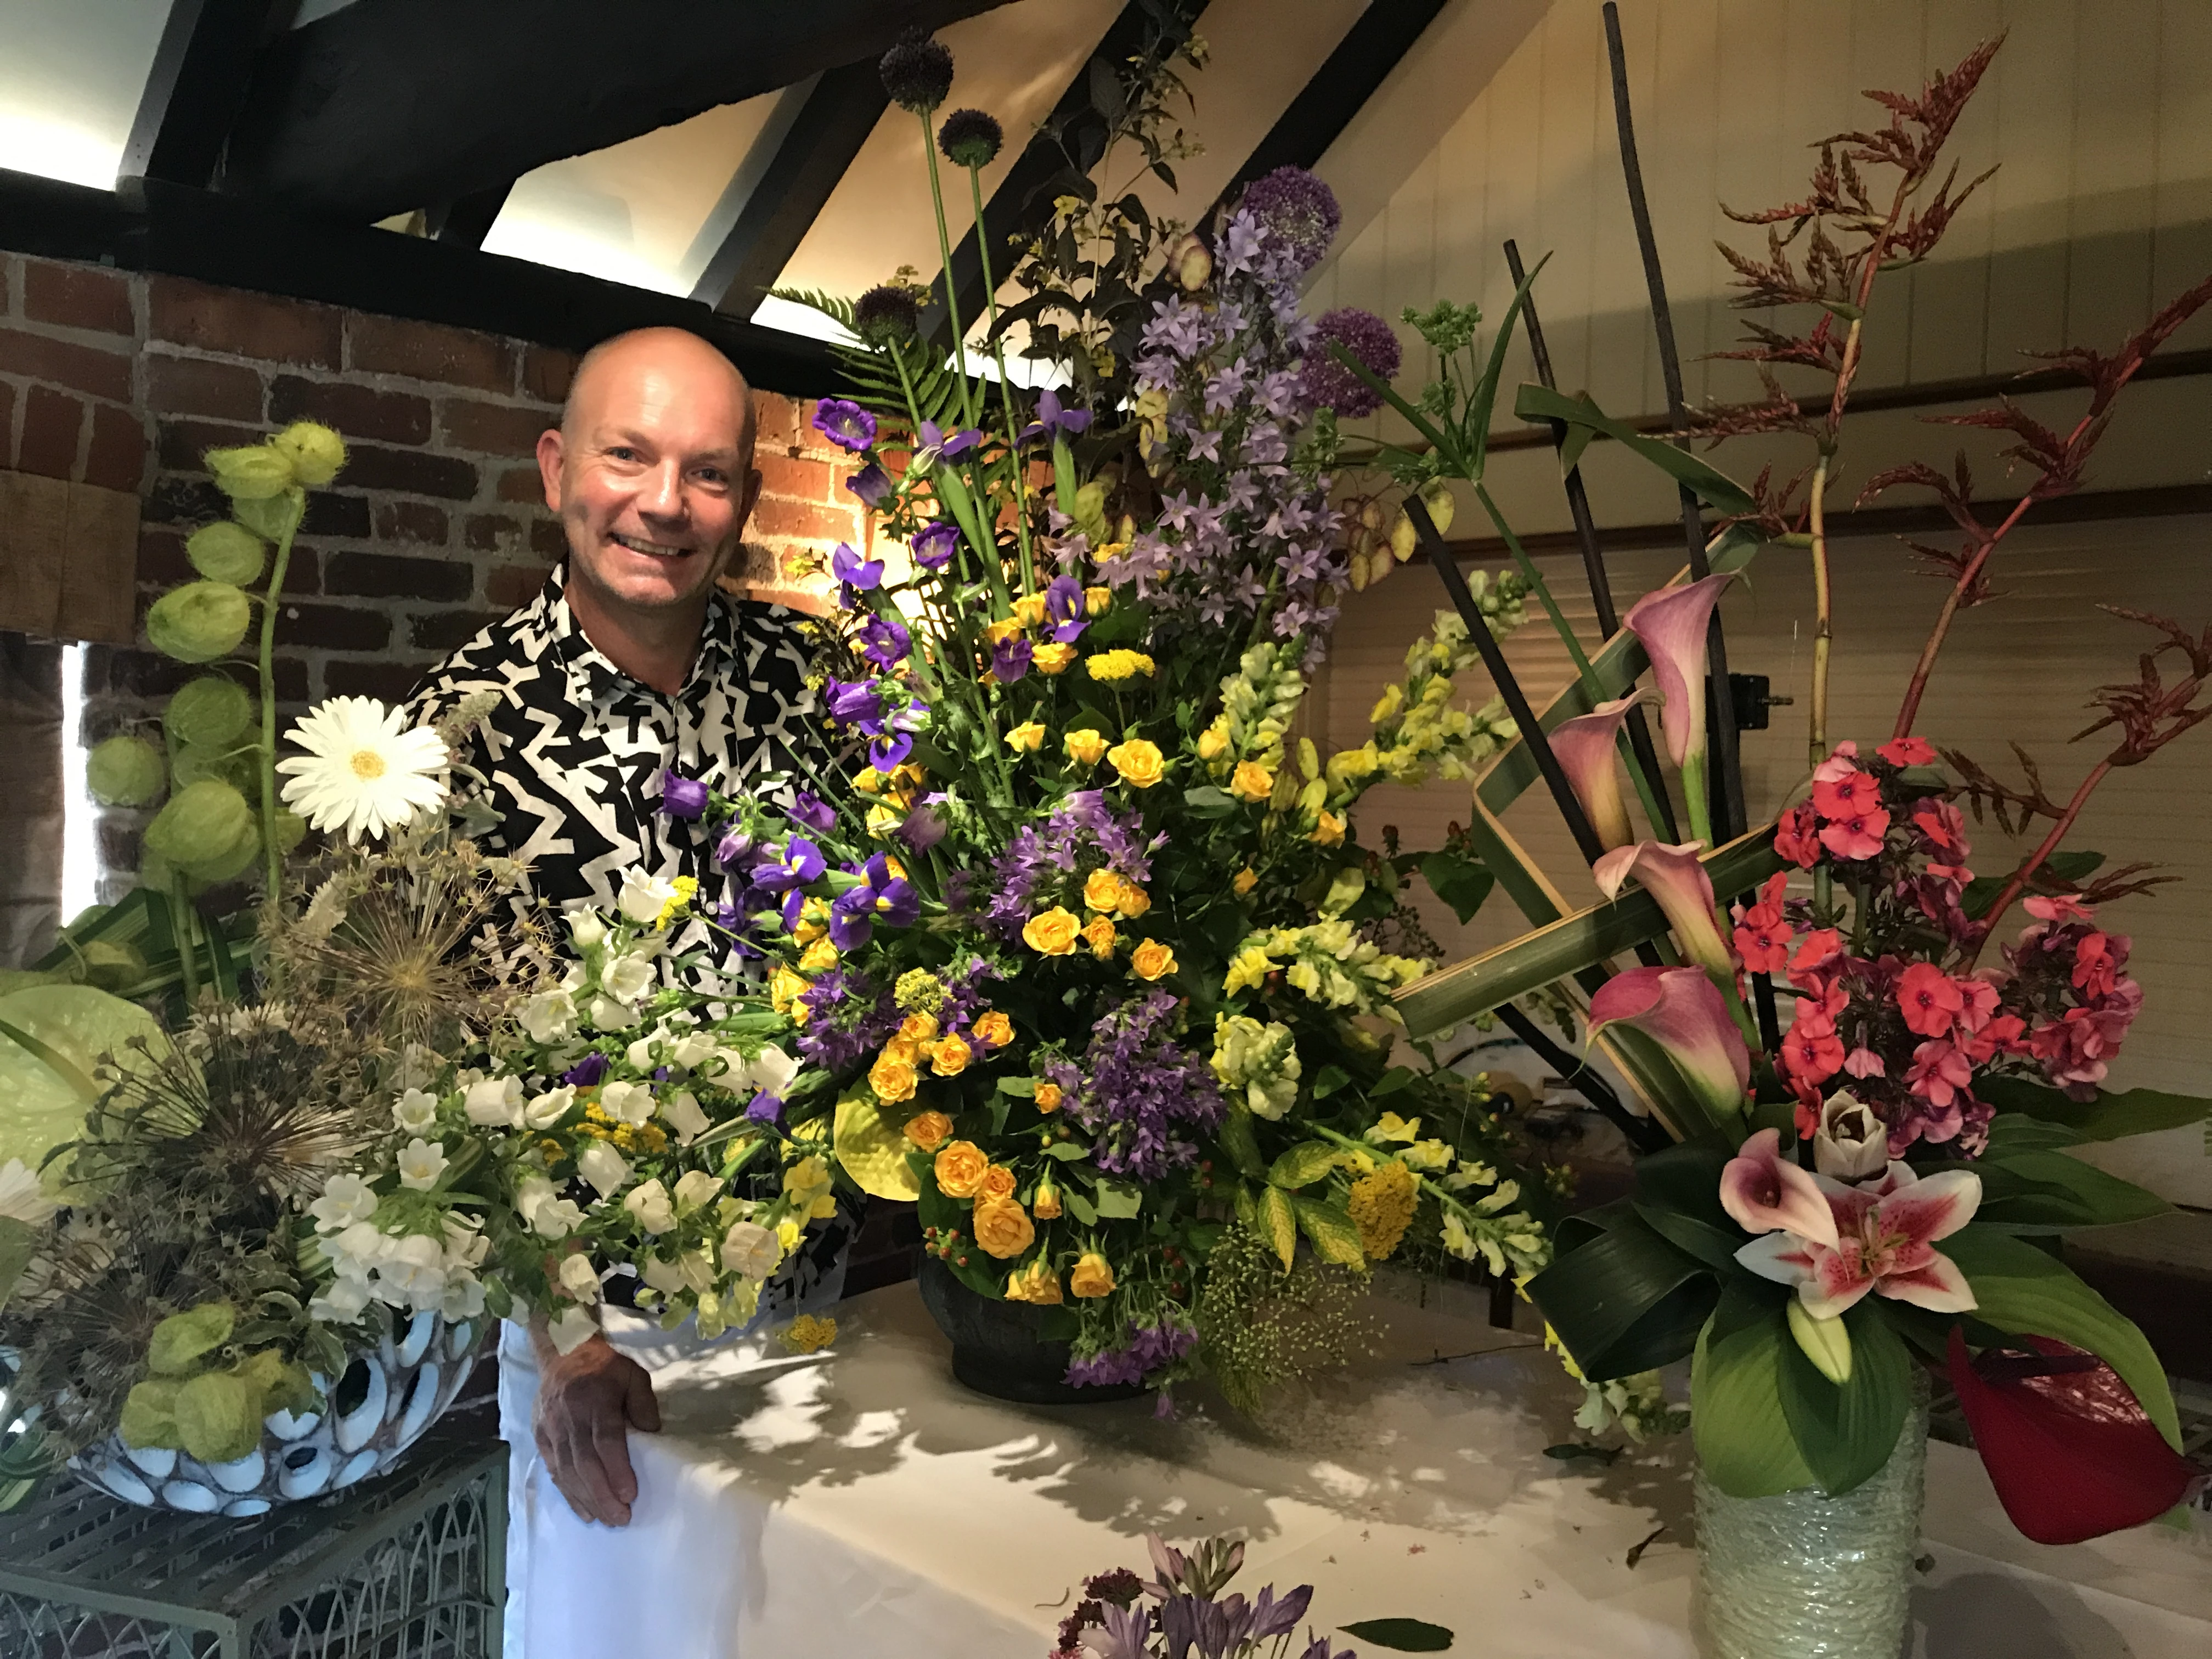 Jonathan Moseley, one of the nation’s best loved TV flower experts